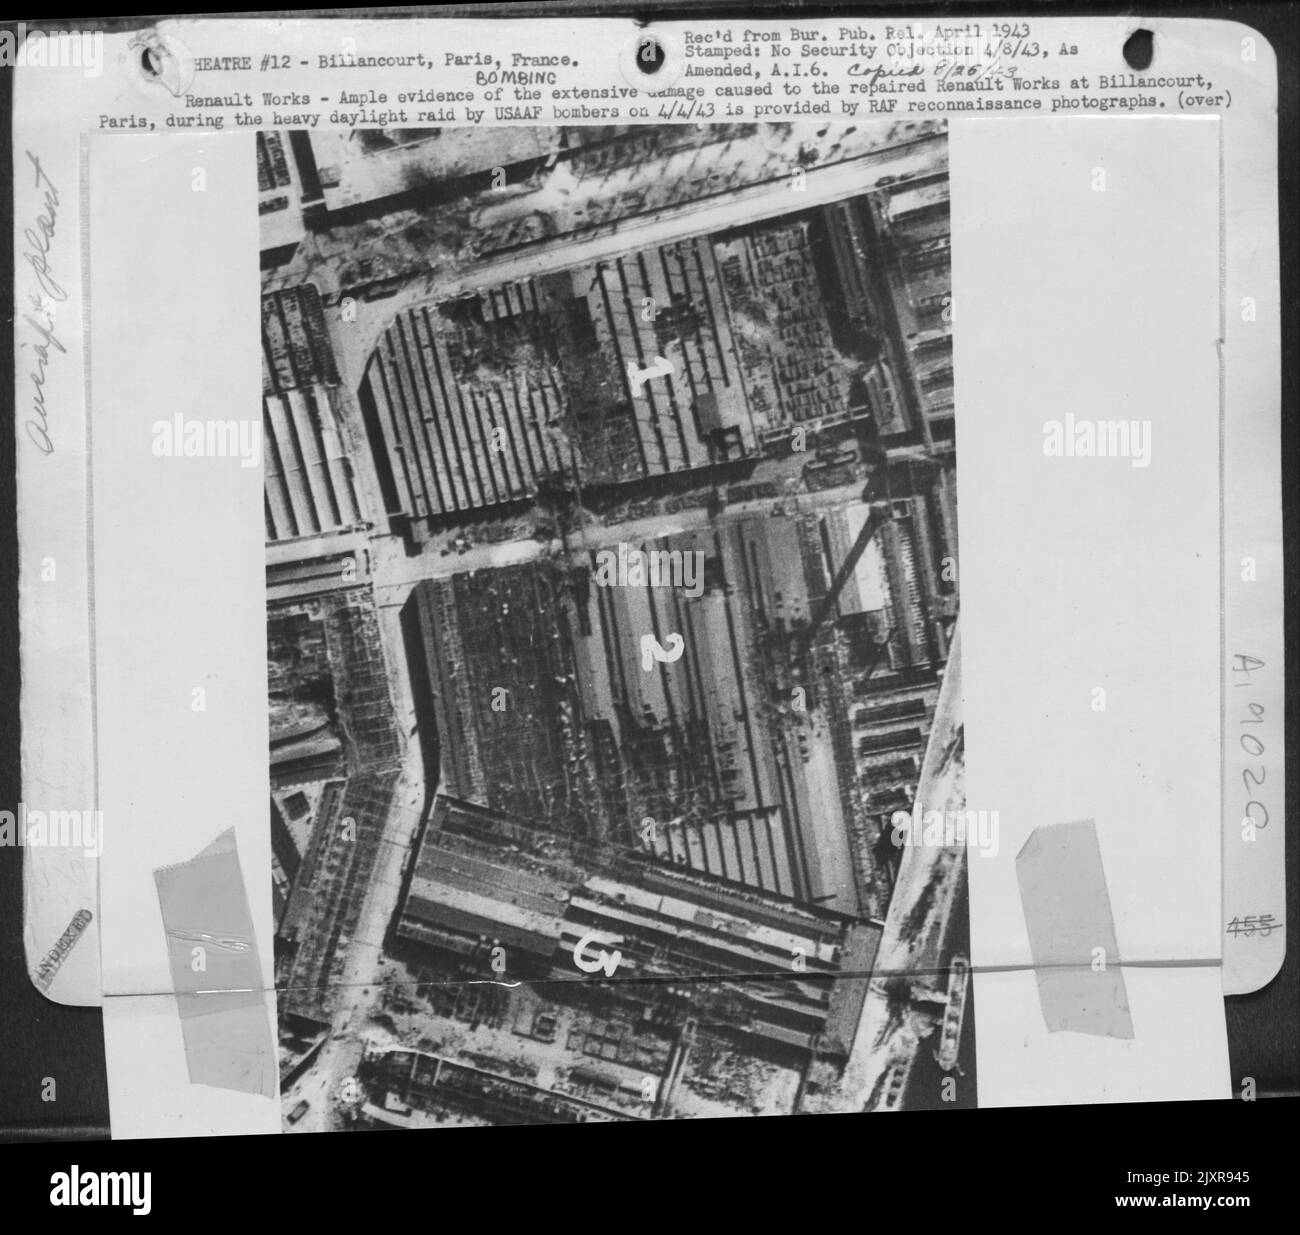 Renault Works-Ample evidence of the extensive damage caused to the repaired Renault Works at Billancourt, Paris, during the heavy daylight raid by USAAF bombers on 4/4/43 is provided by RAF reconnaissance photographs. There is very severe damage in Stock Photo